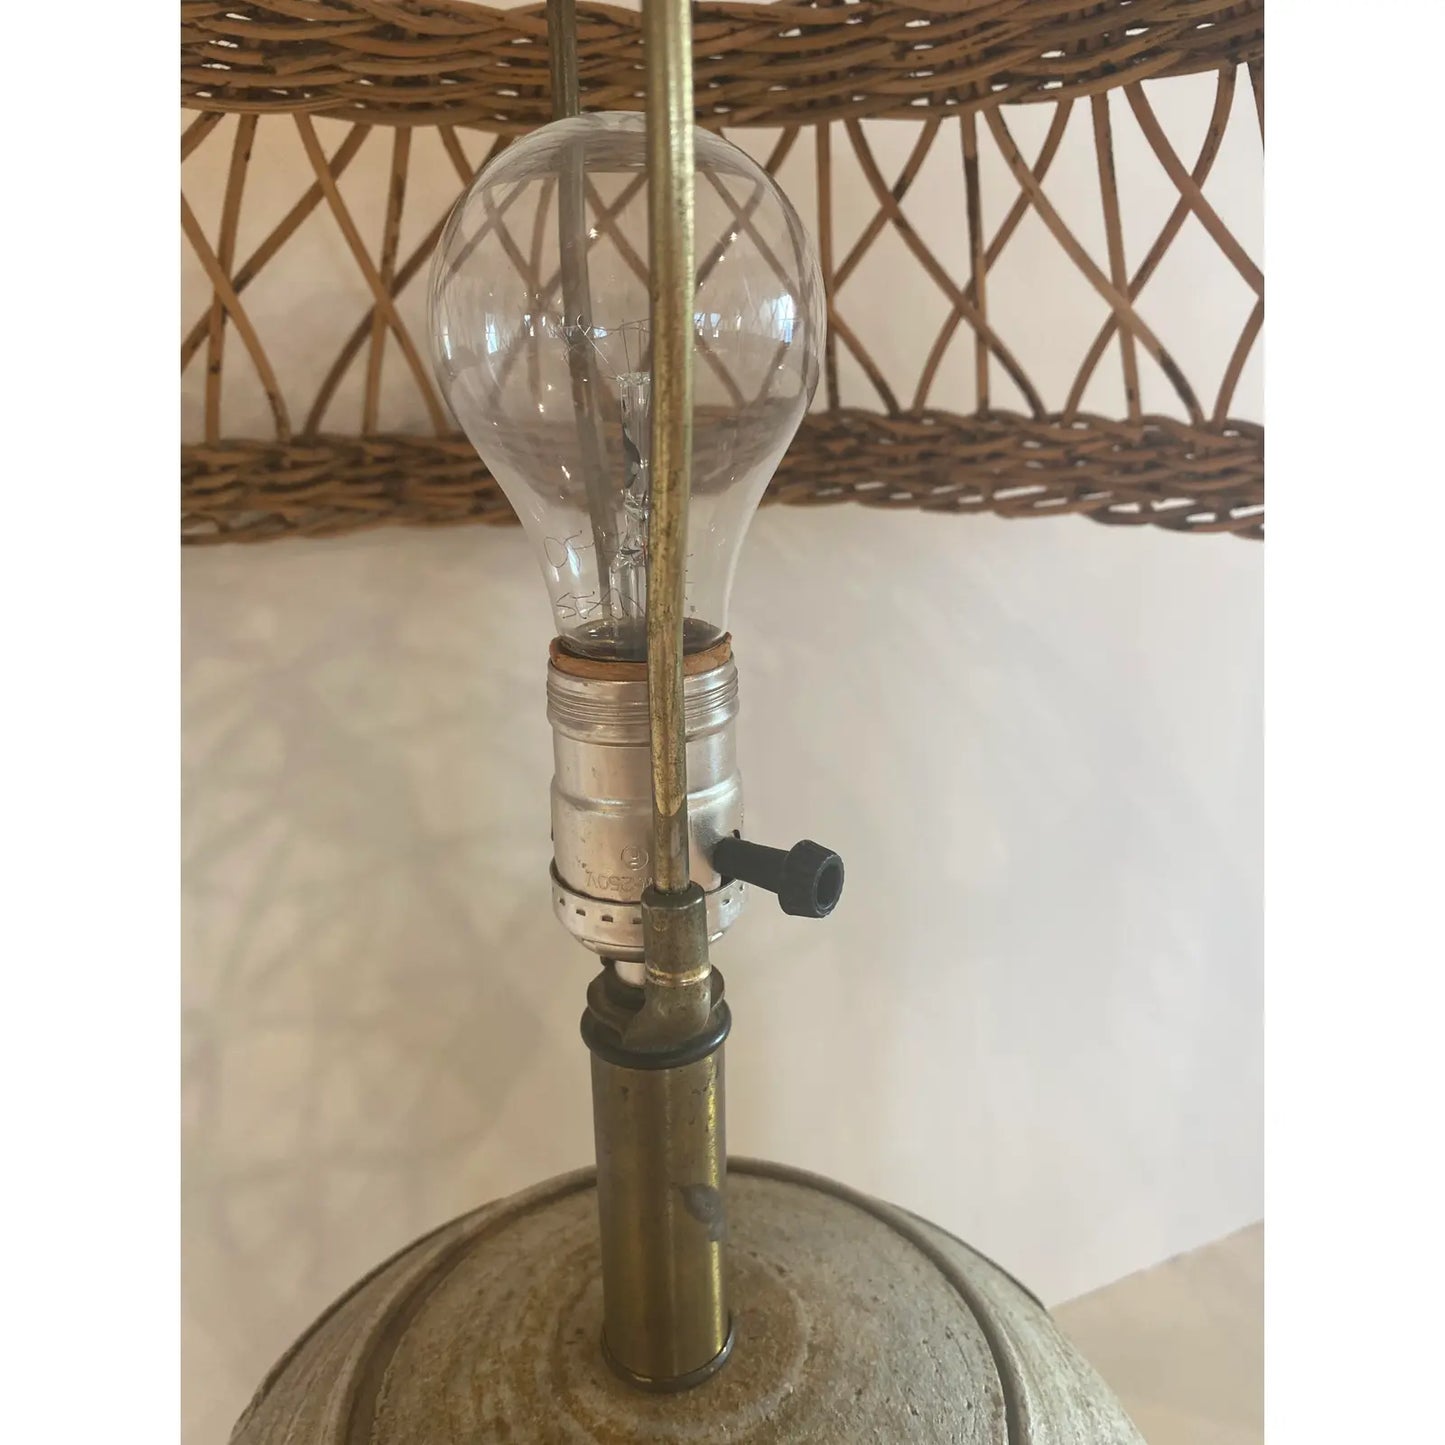 Midcentury Striated Pottery Table Lamp With Wicker Shade